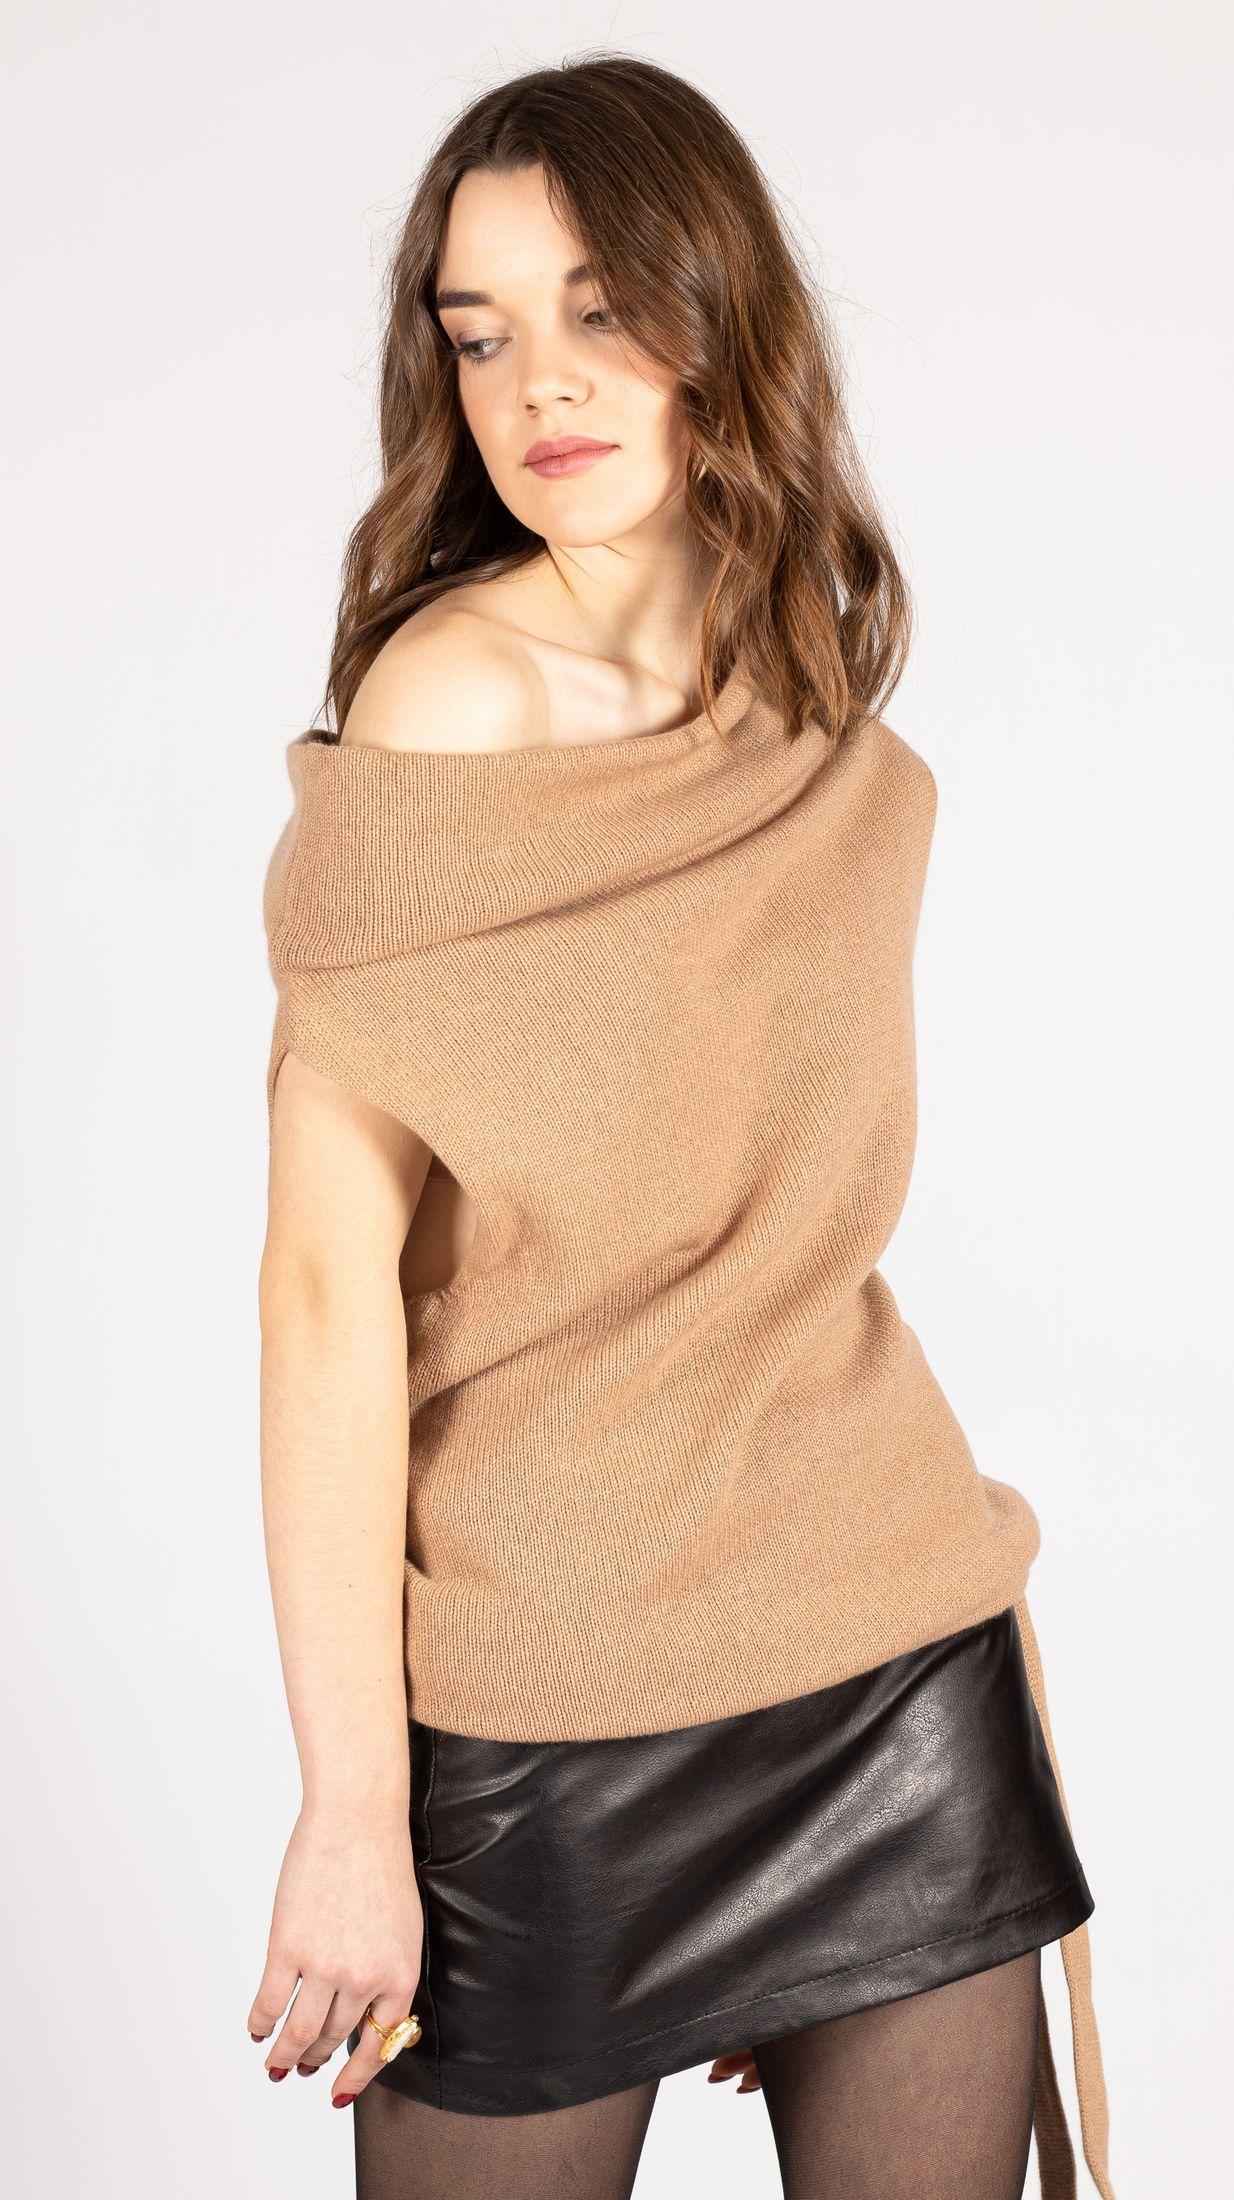 Sleeveless cashmere top vest sweater CLAIRE